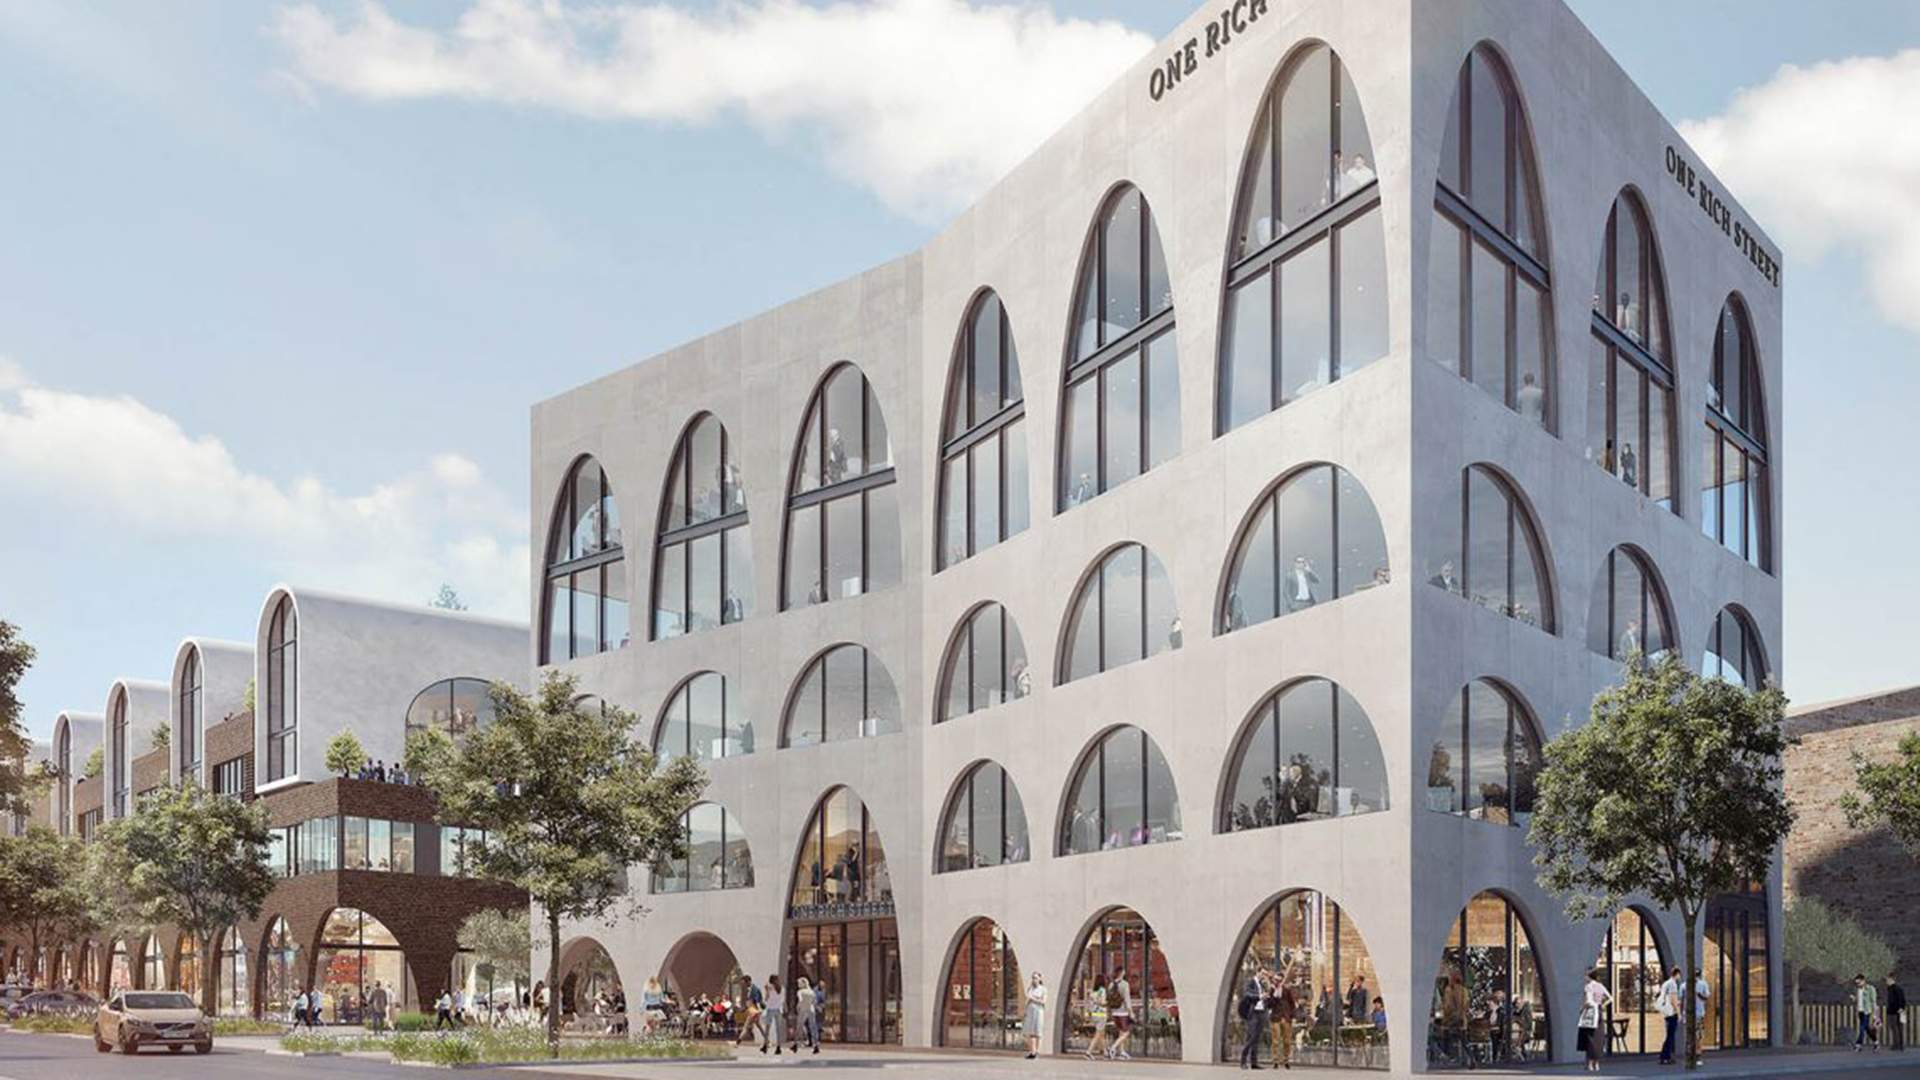 Marrickville Might Be Getting a New Creative Arts Precinct